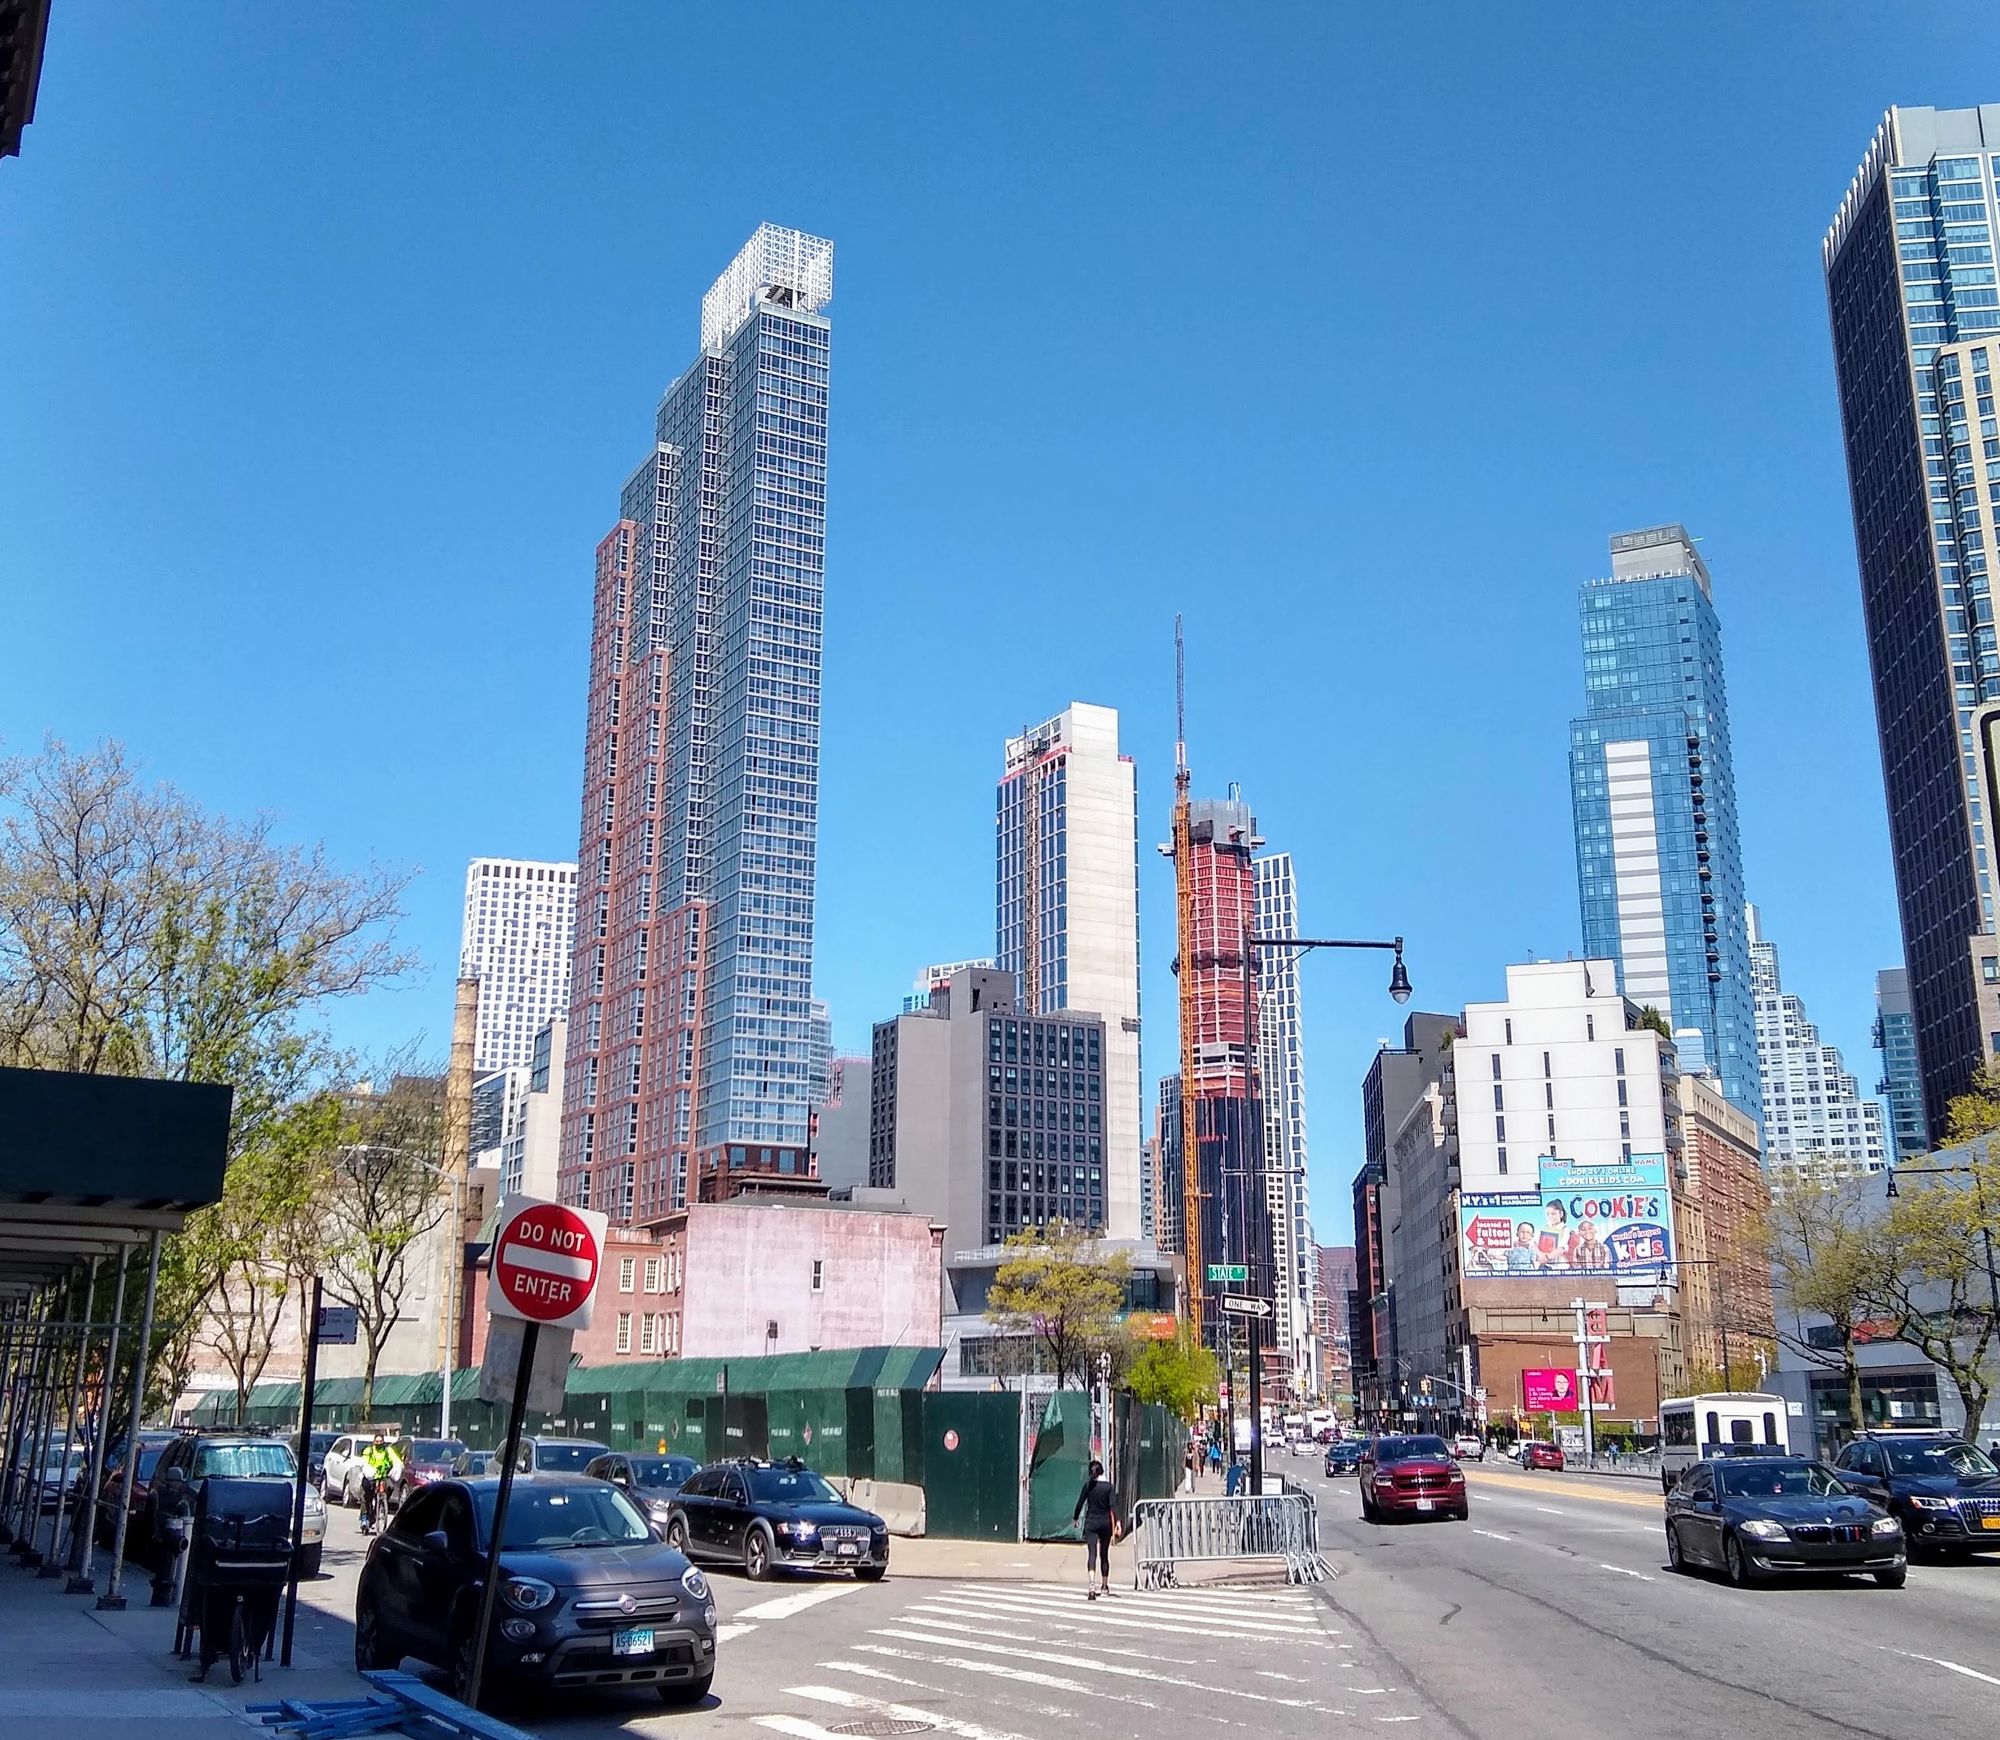 80 Flatbush Project Swaps Office Space for Mostly Market-Rate Housing in First Tower As It Begins Construction